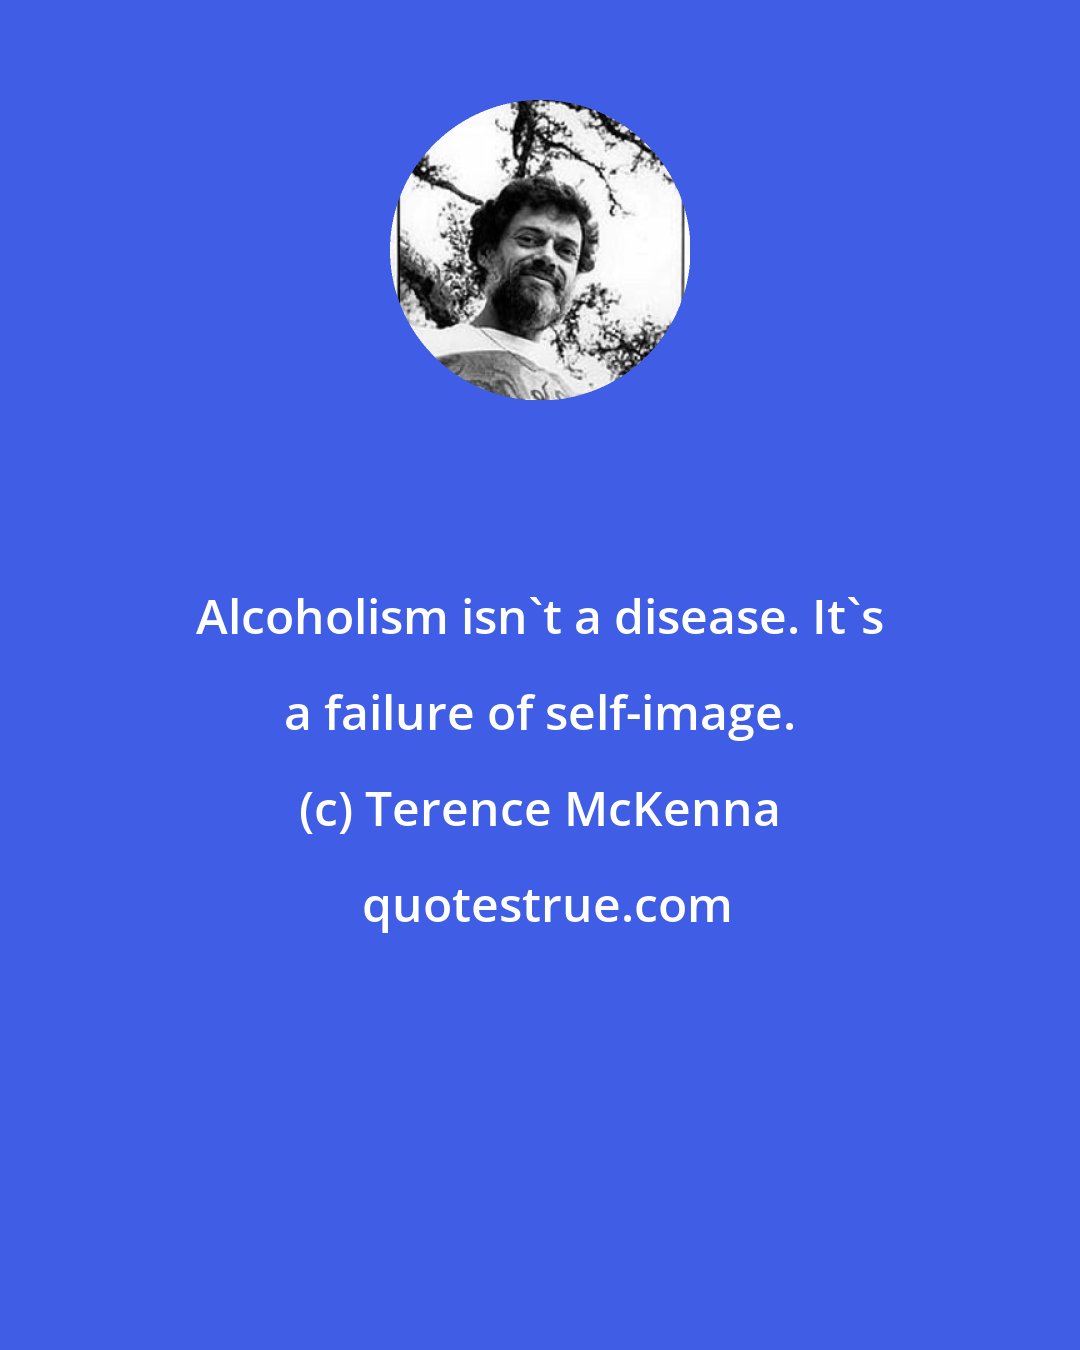 Terence McKenna: Alcoholism isn't a disease. It's a failure of self-image.